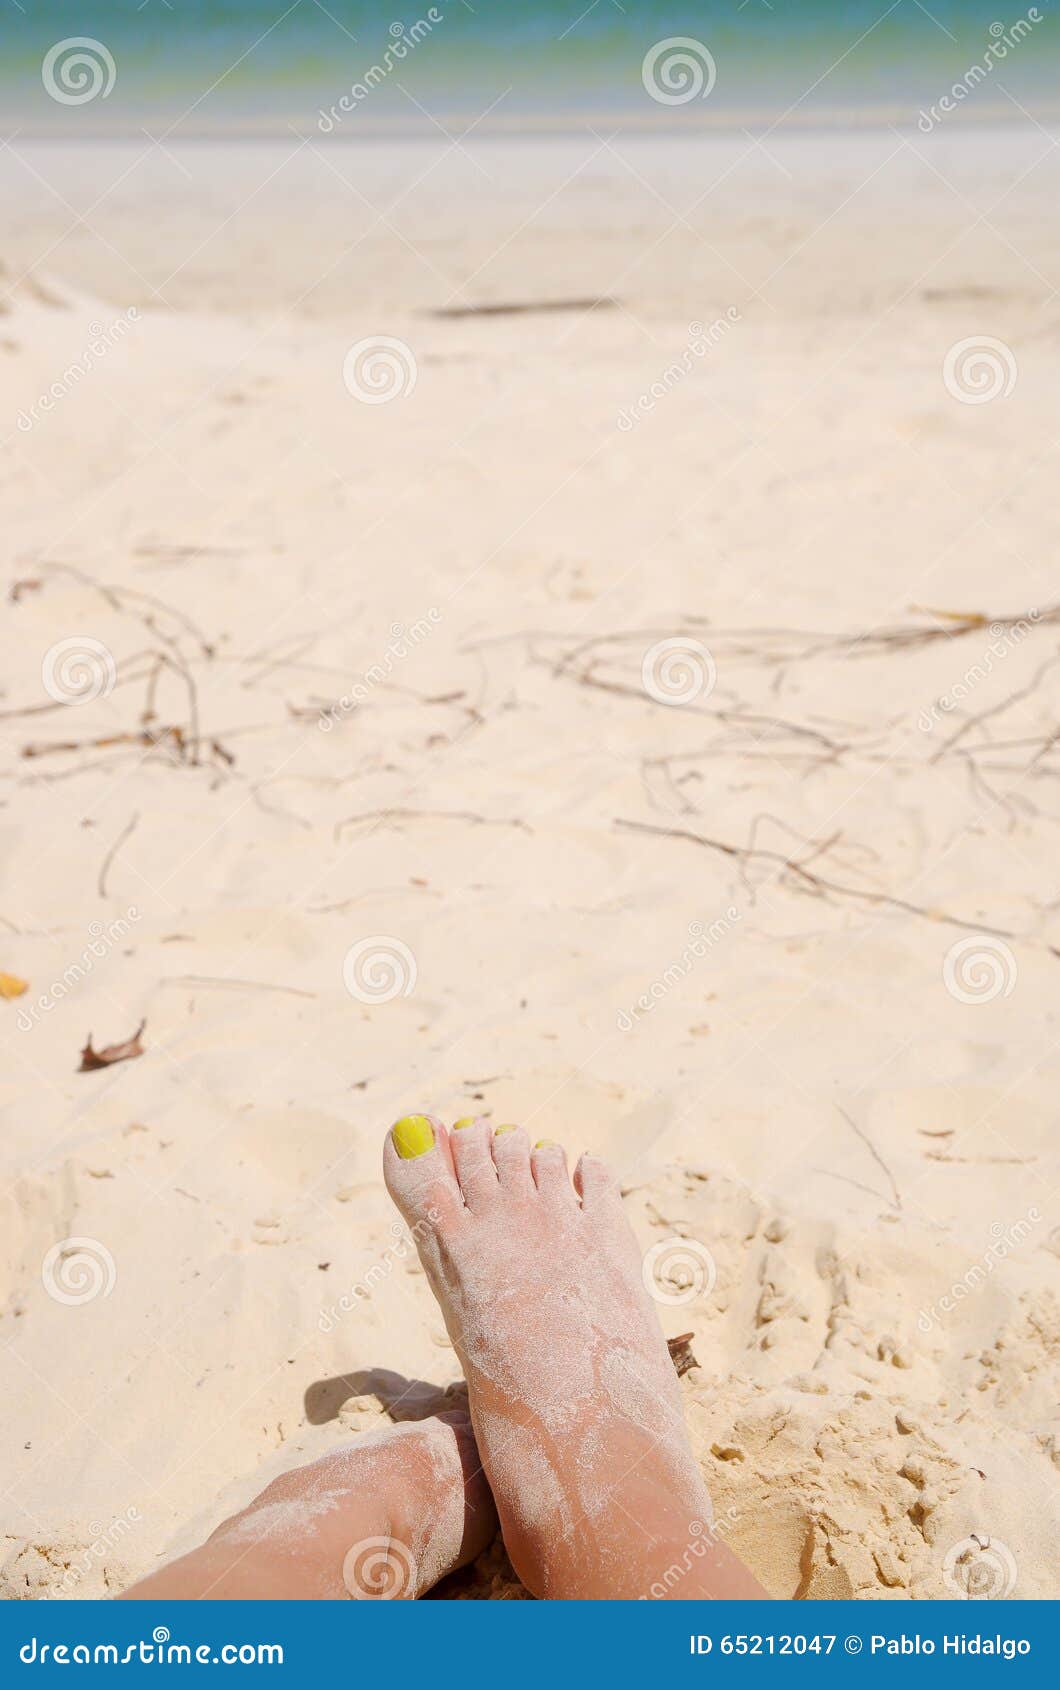 Feet Crossing Over Each Other Covered in Sand on Stock Image - Image of ...